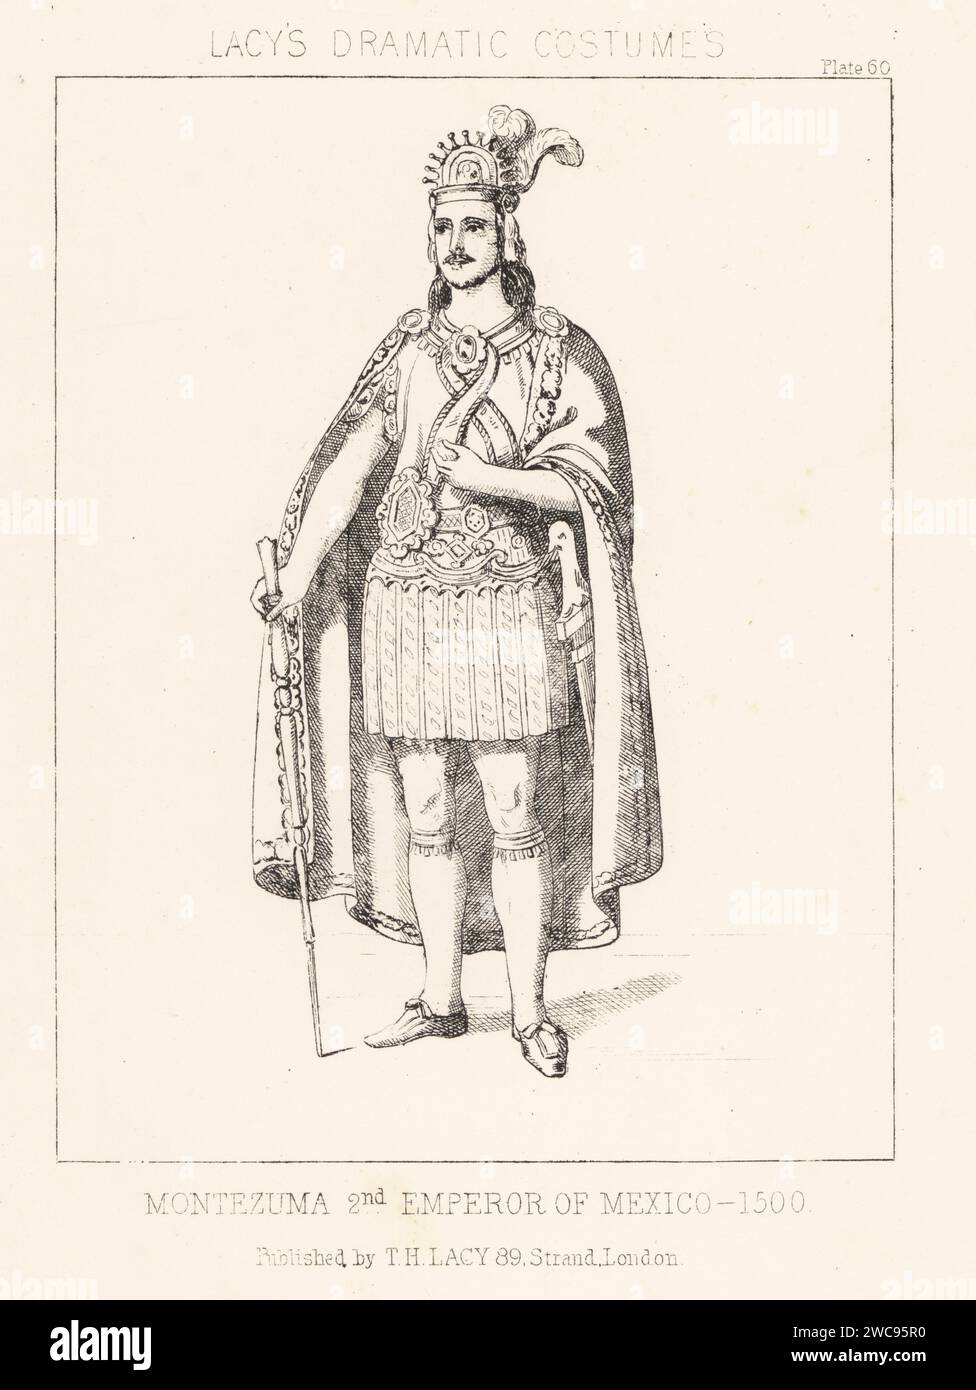 Motecuhzoma Xocoyotzin, Moctezuma II, ninth emperor of the Aztec Empire, c. 1466-1520. In plumed headdress, cloak, tunic and shoes, with sword and staff. Montezuma 2nd emperor of Mexico, 1500. Lithograph from Thomas Hailes Lacy's Male Costumes, Historical, National and Dramatic in 200 Plates, London, 1865. Lacy (1809-1873) was a British actor, playwright, theatrical manager and publisher. Stock Photo